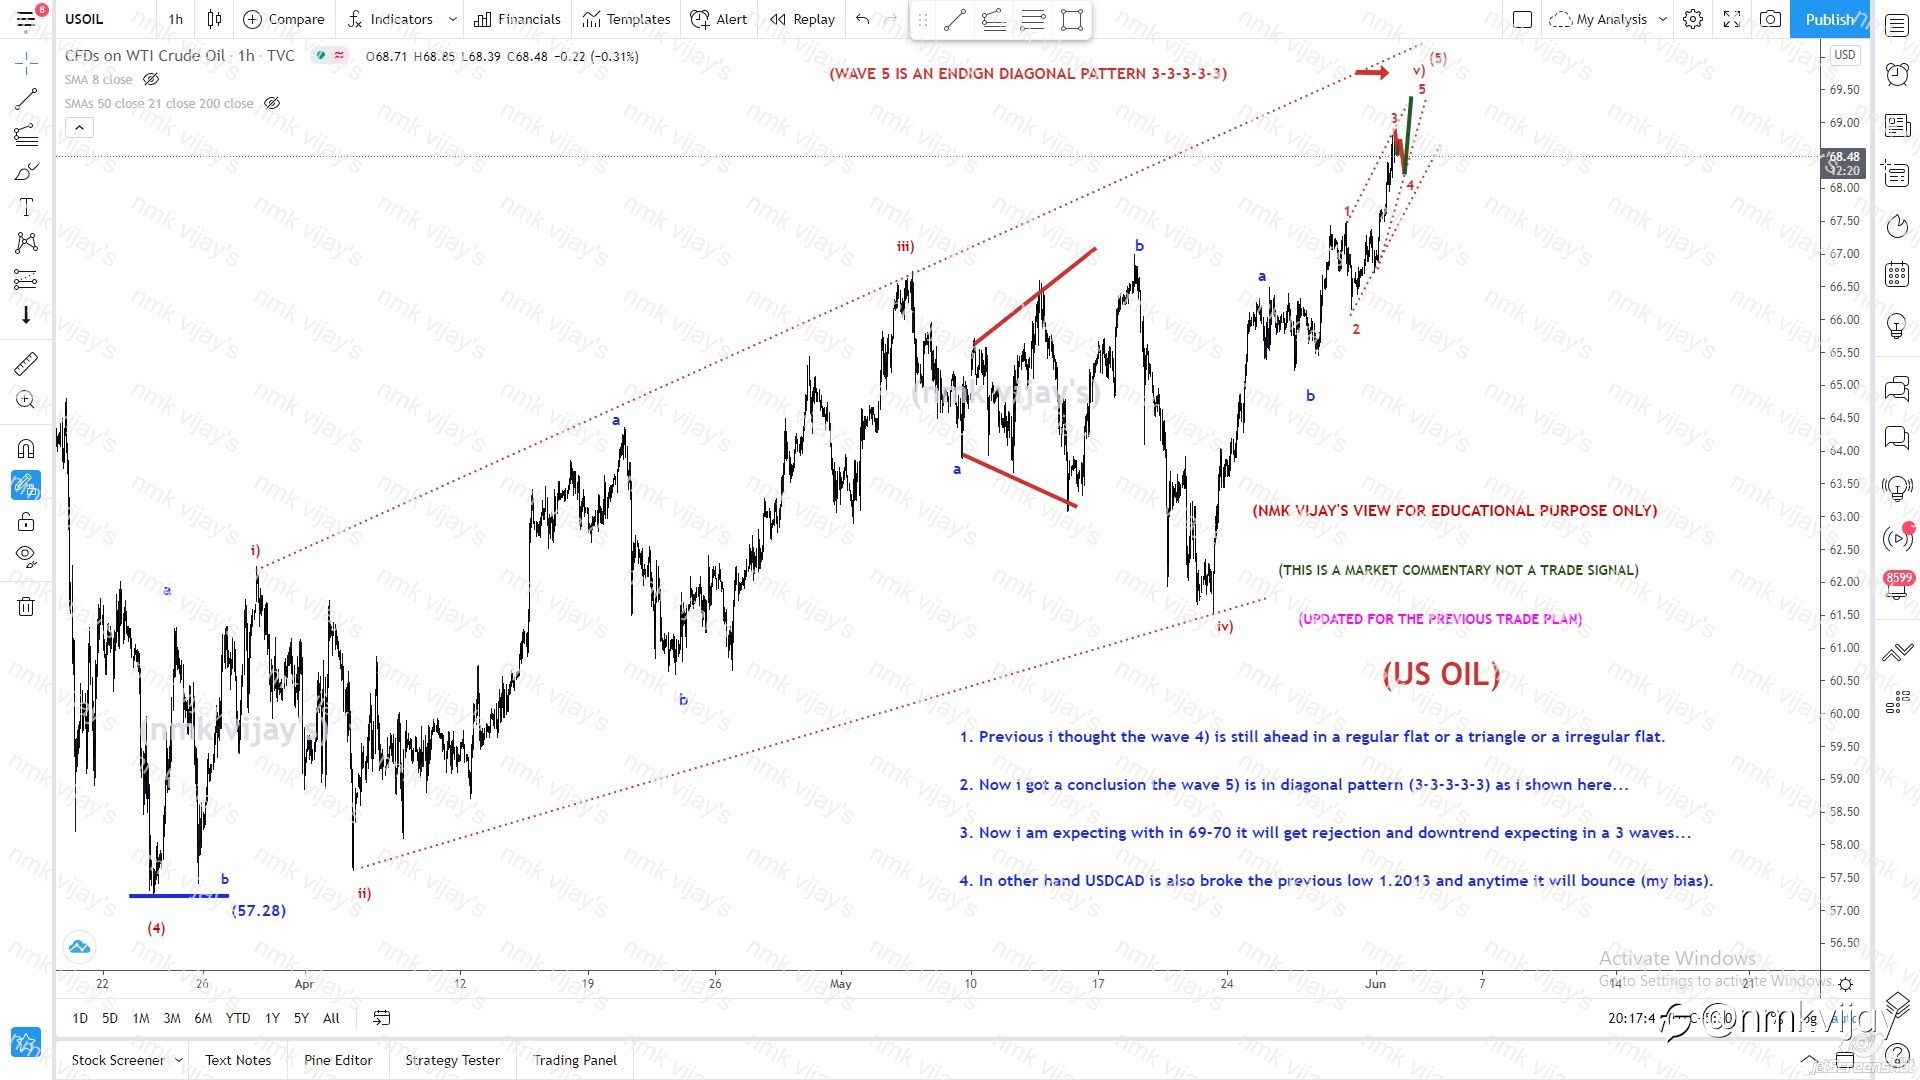 USOIL-Wave (5) is an ending diagonal and will get reject @ 69-70$